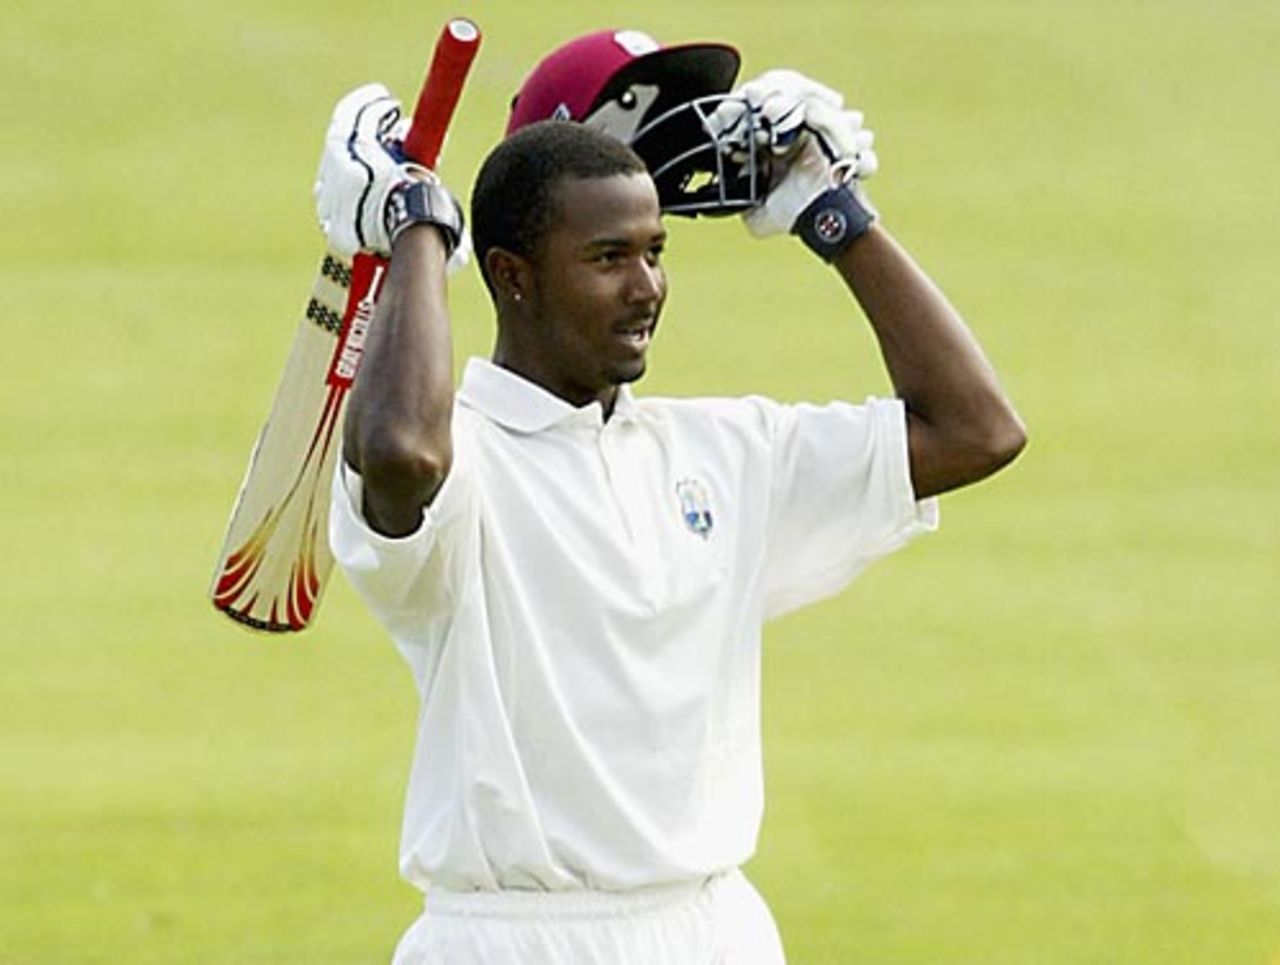 Dwayne Smith celebrates his century on debut, South Africa v West Indies, Newlands, 2004